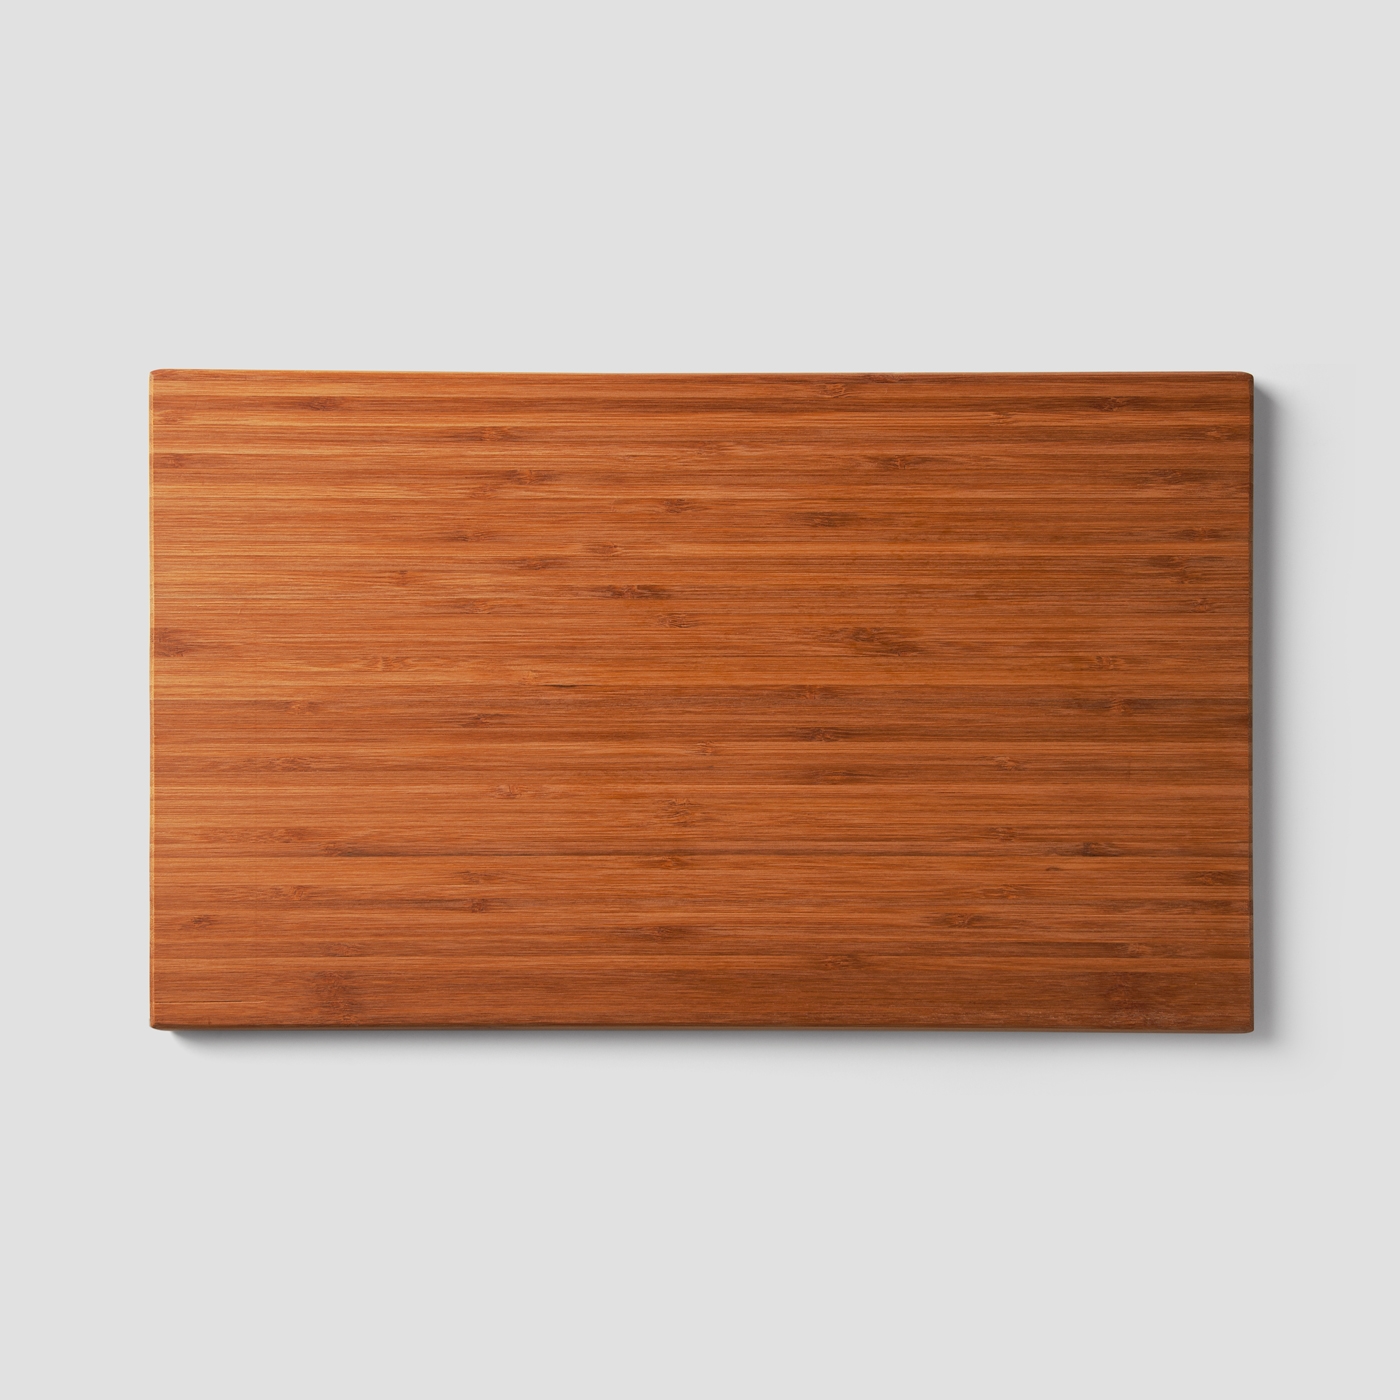 Top View of Big Wooden Desk Mockup FREE PSD